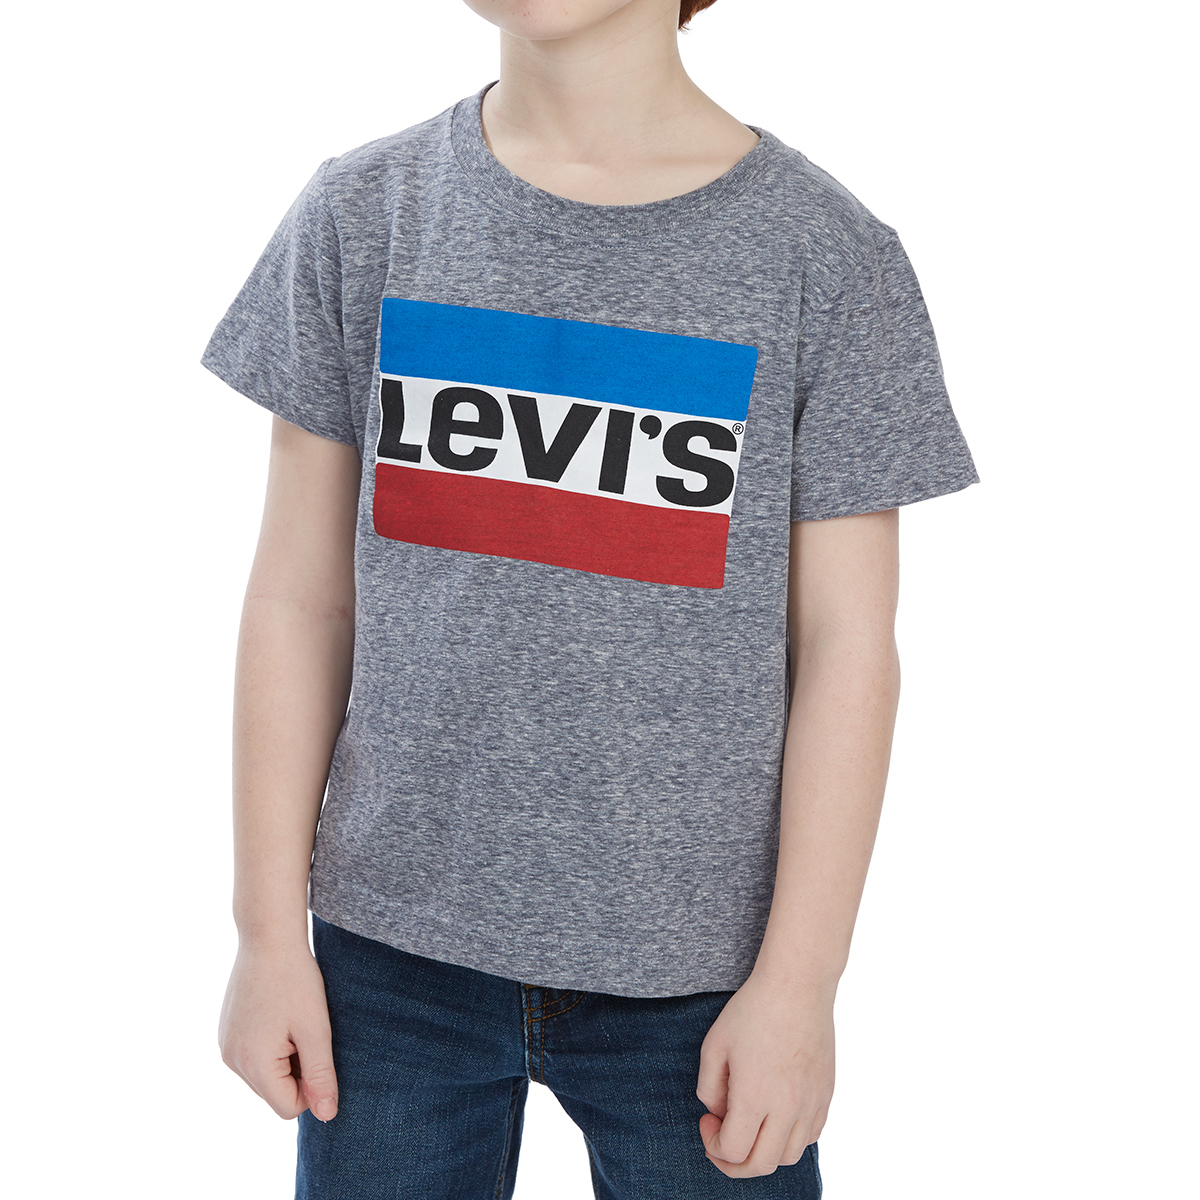 Levi's Toddler Boys' Graphic Short-Sleeve Tee - Blue, 3T